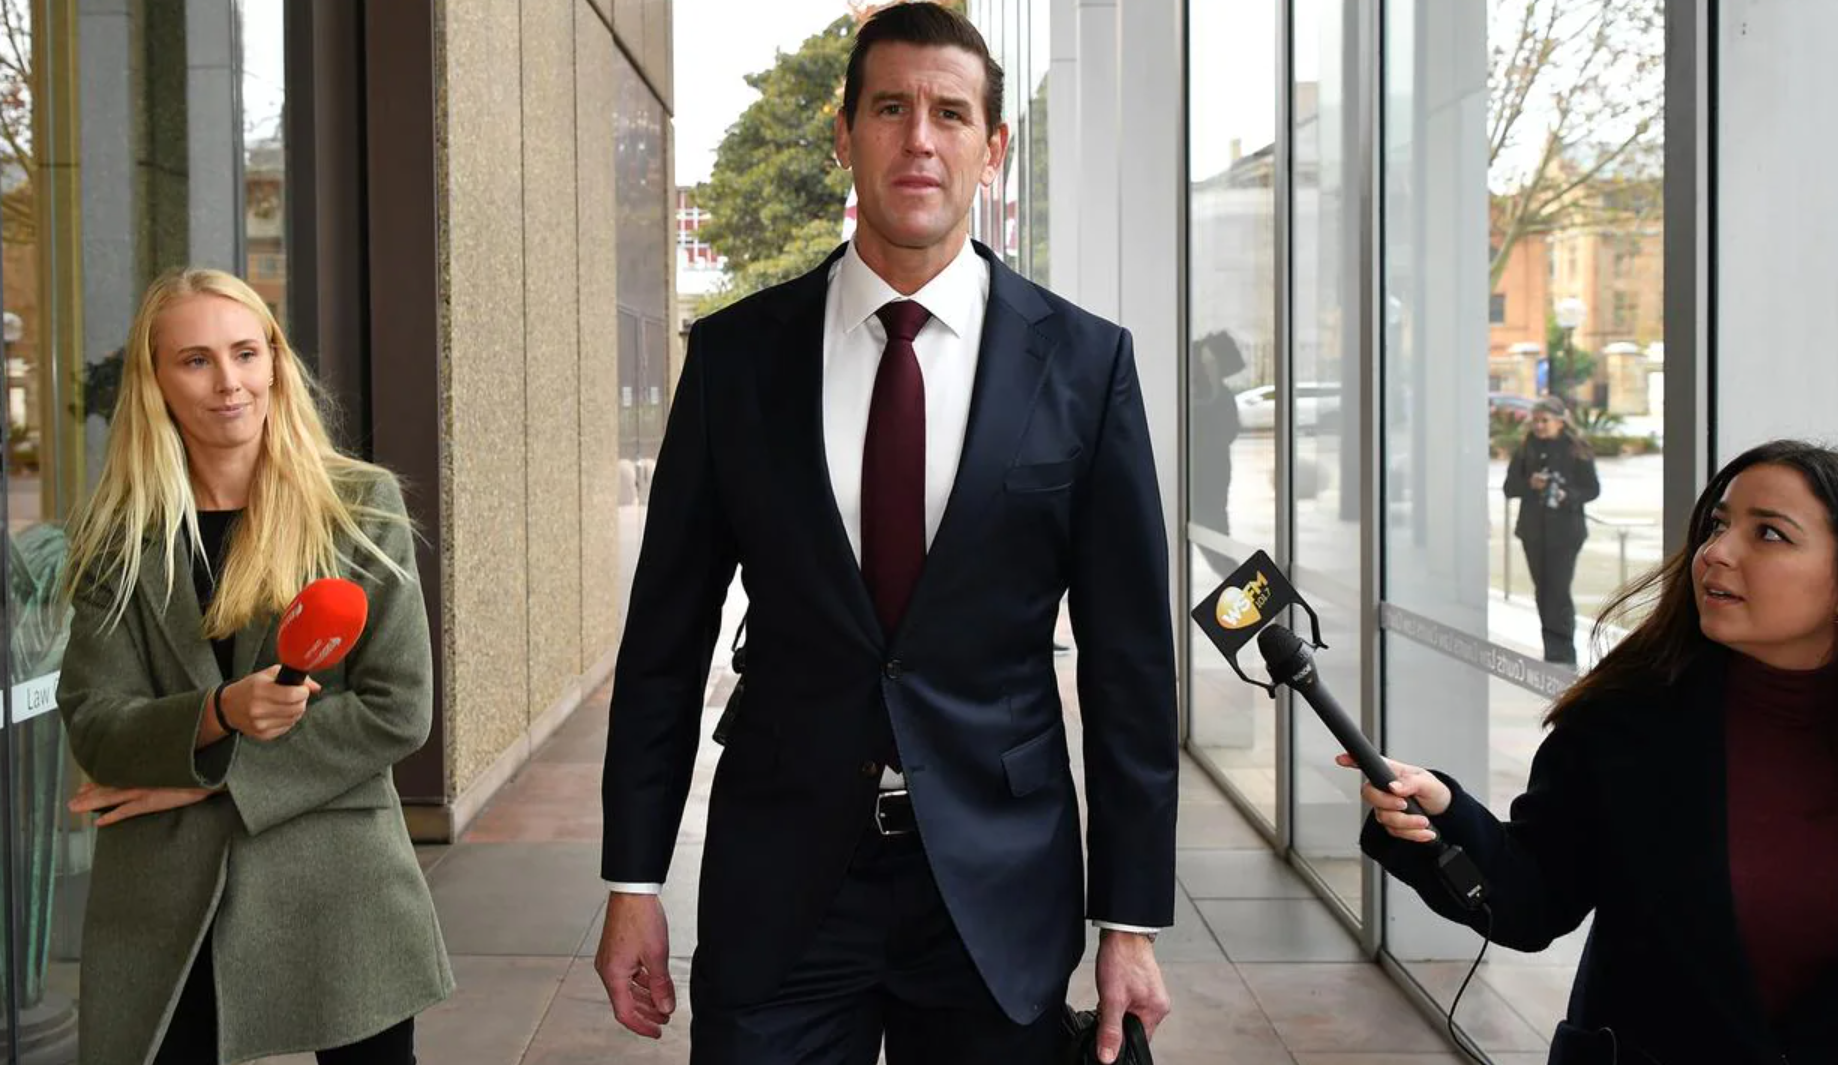 Imperialism is on trial in Ben Roberts-Smith's case